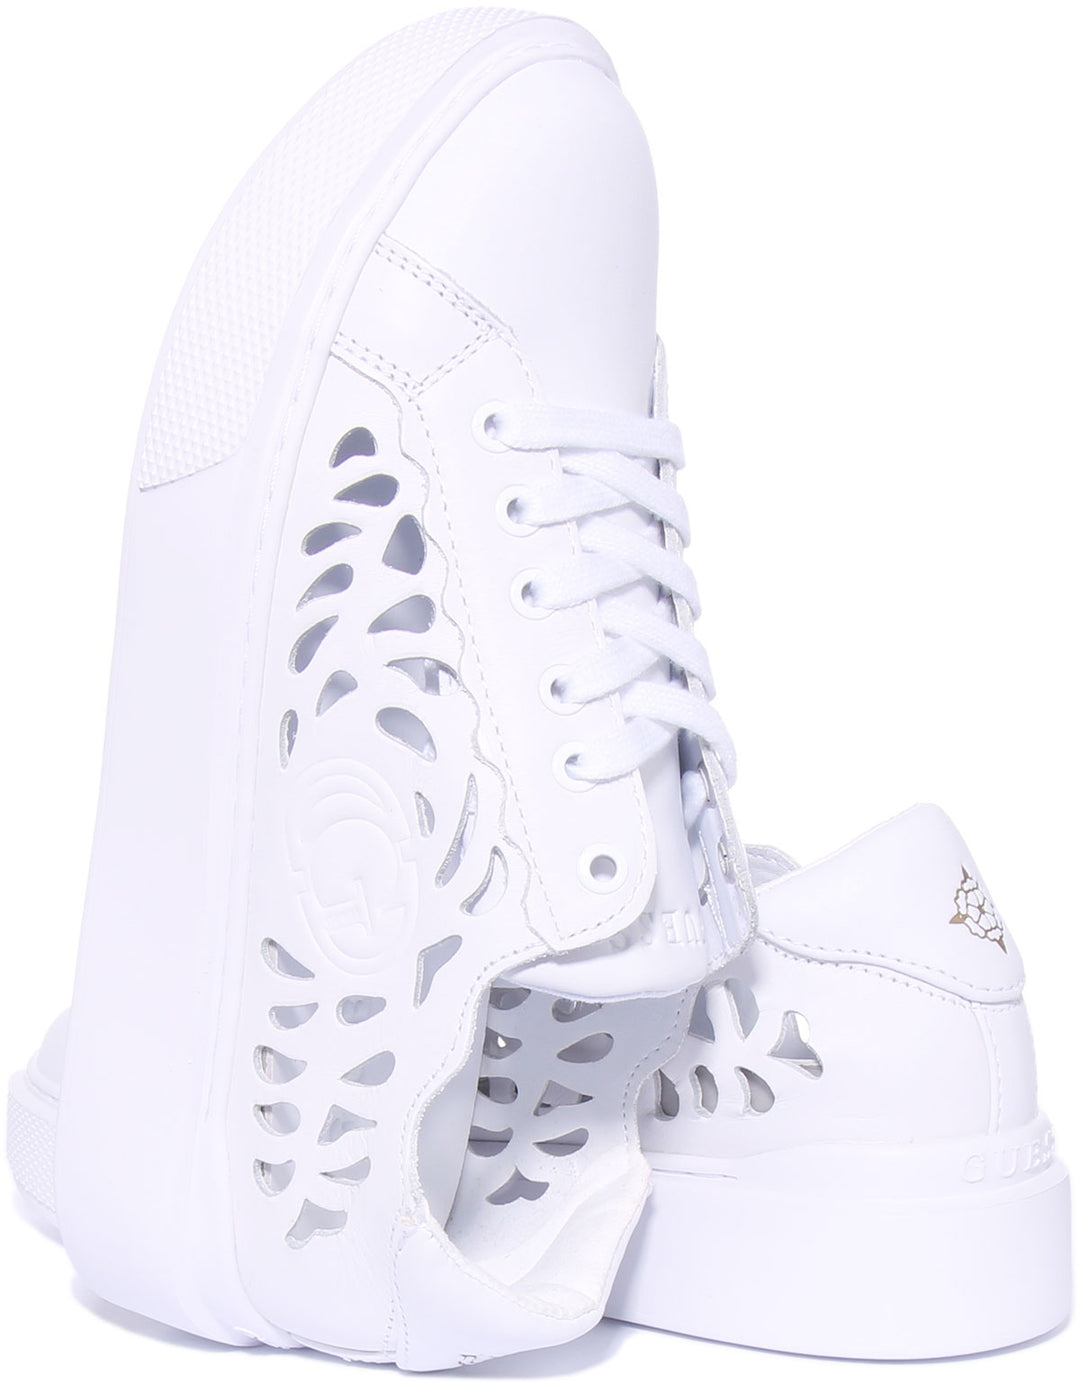 Guess Pepzi Lazer Cut Trainer In White For Women